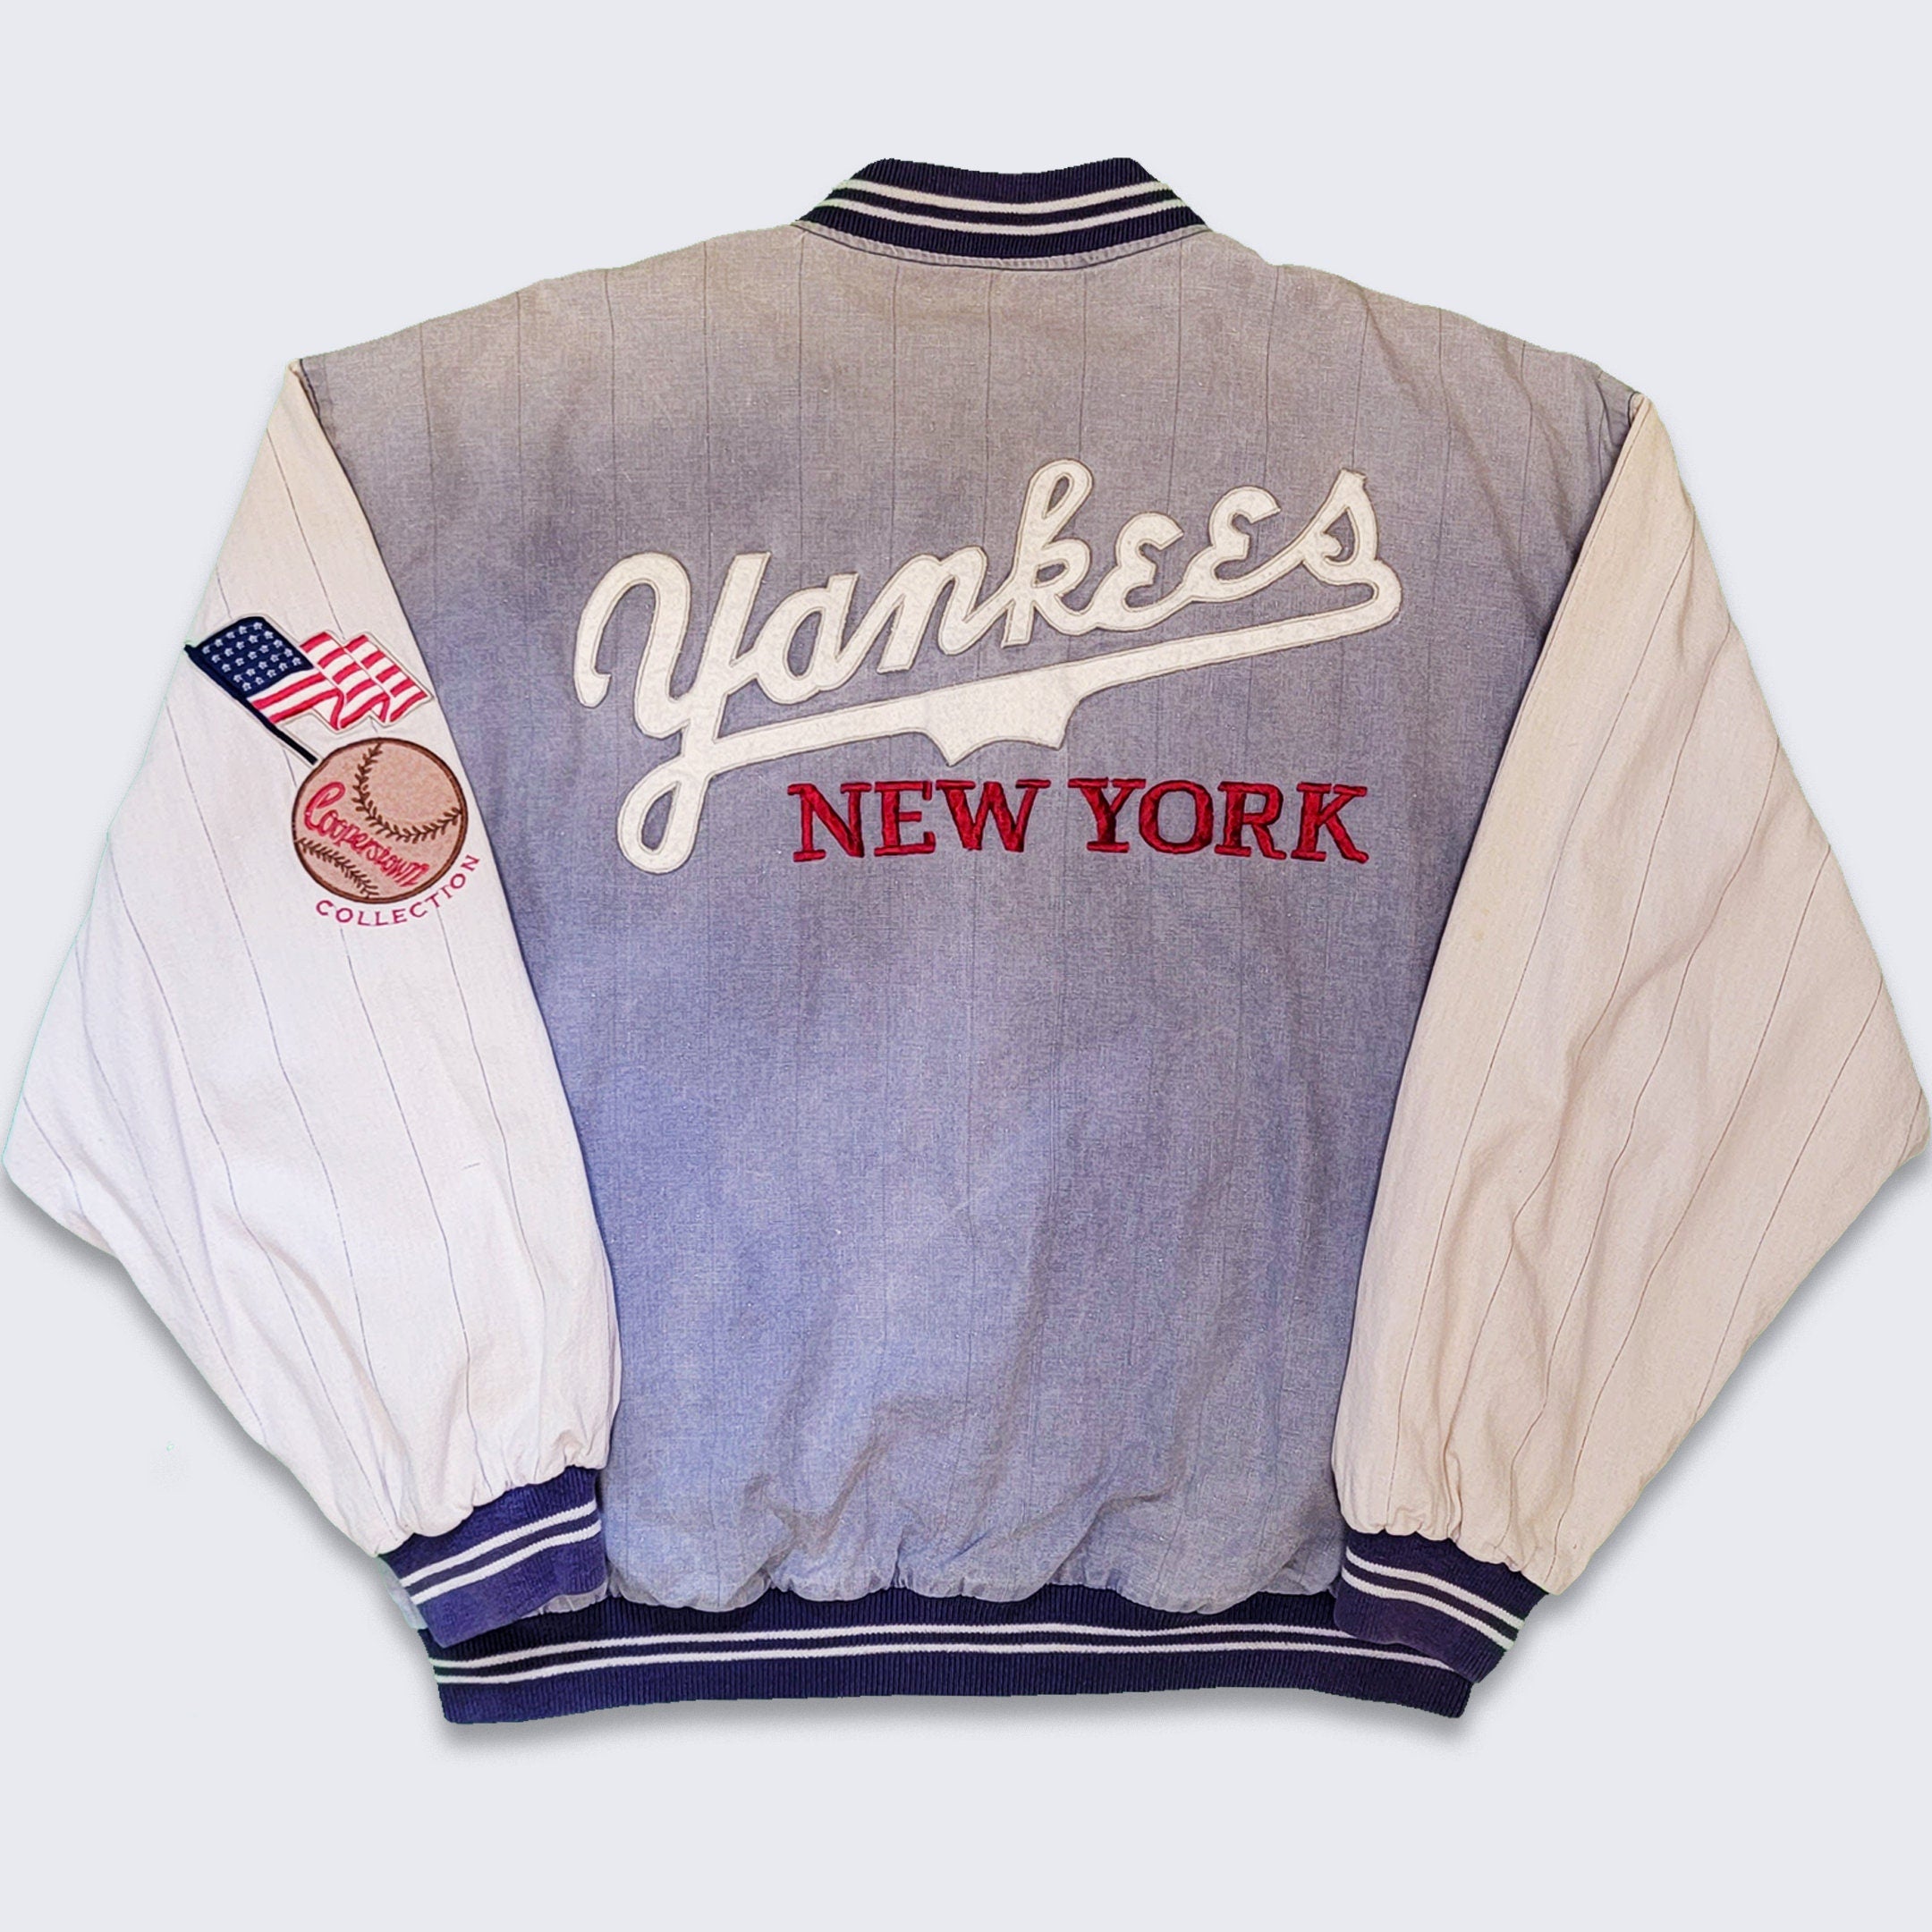 New York Yankees Jacket Cooperstown Collection 1961 World Series